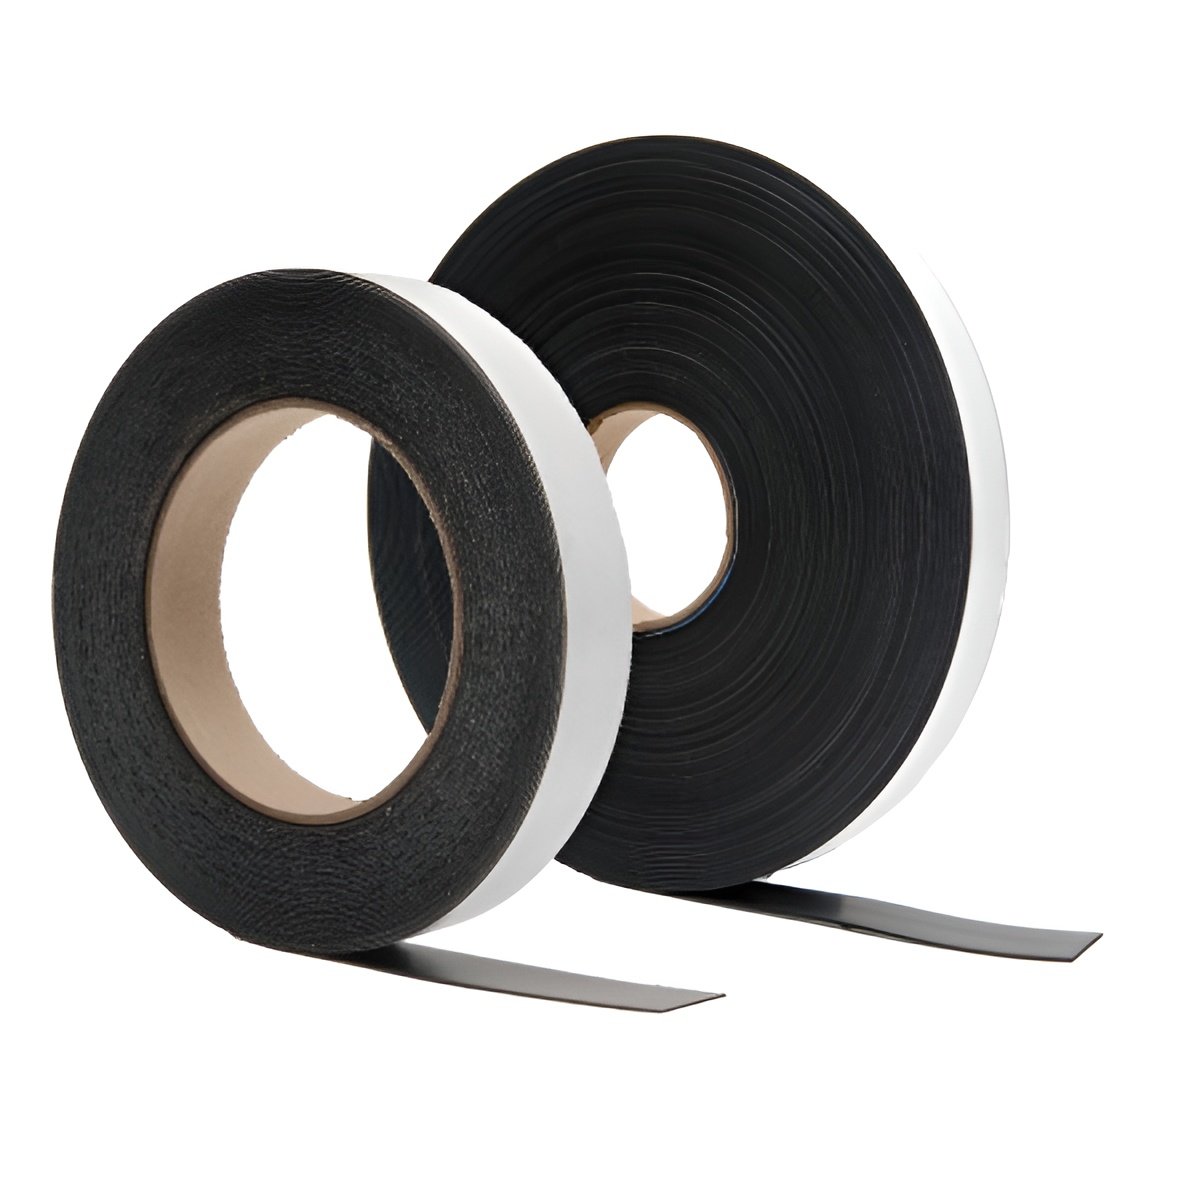 Self Adhesive Flexible Magnet Tape Roll For Craft DIY Projects